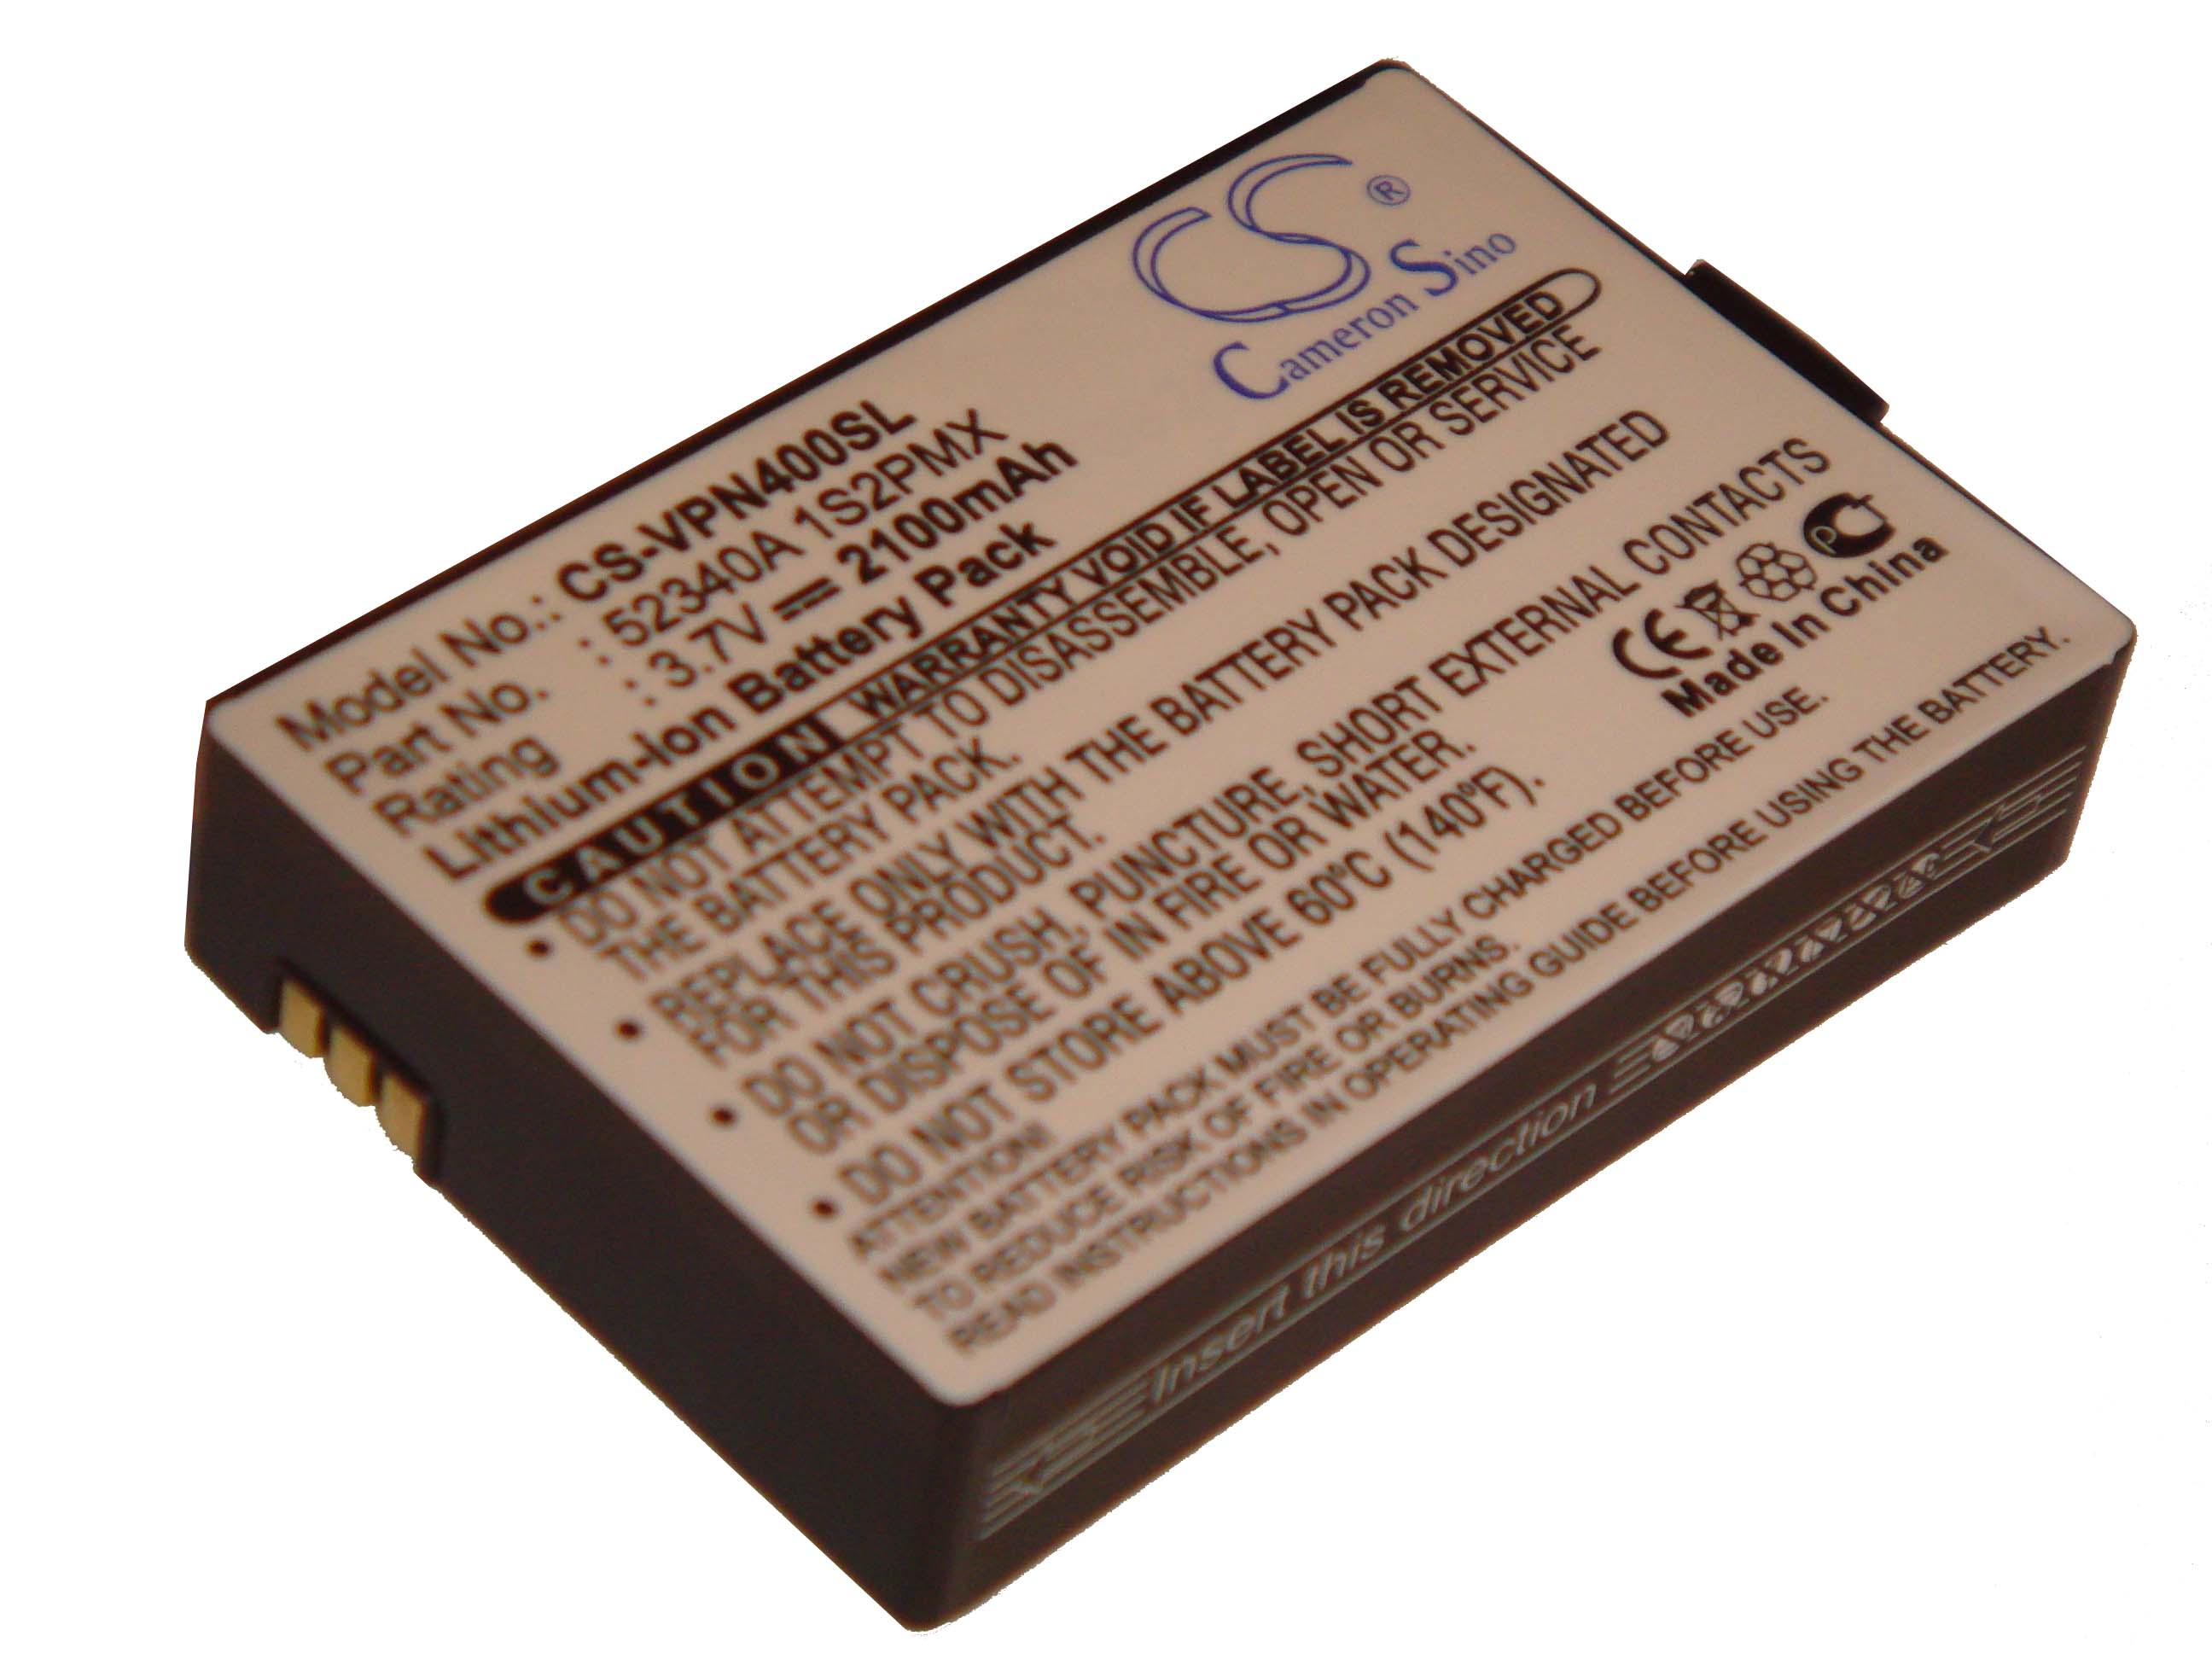 GPS Battery Replacement for VDO 52340A 1S2PMX - 2100mAh, 3.7V